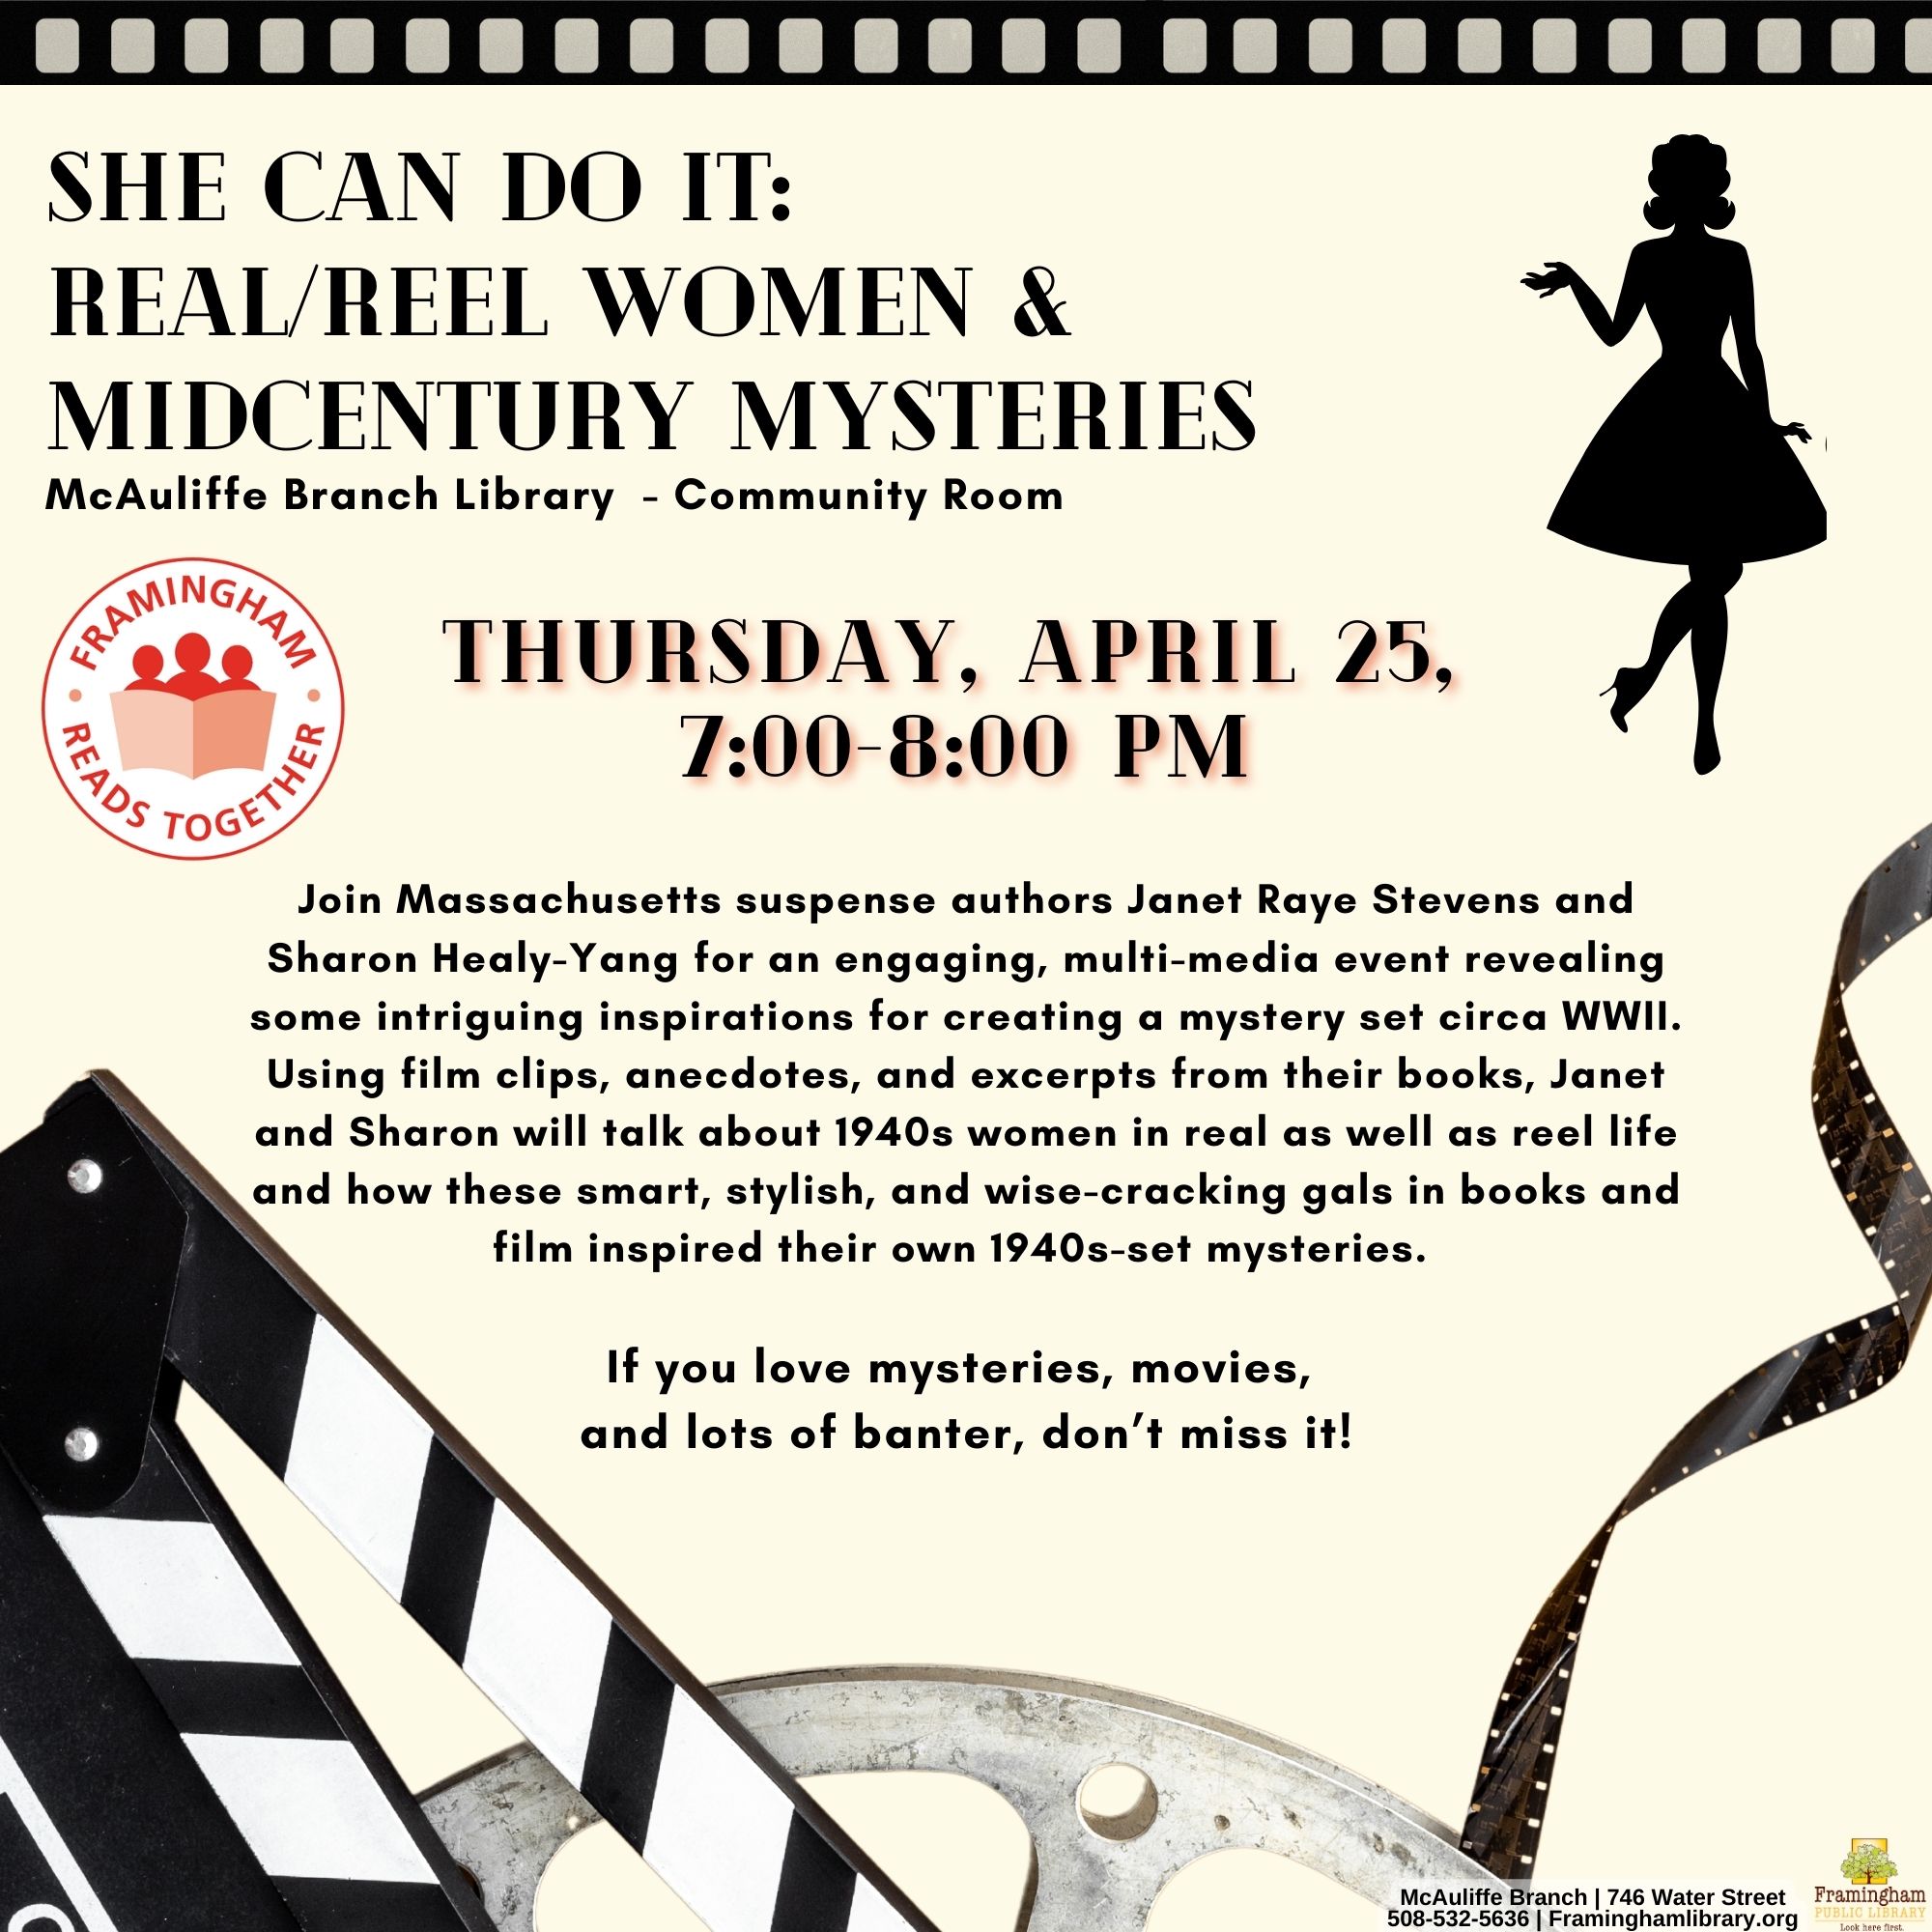 She Can Do It: Real/‘Reel’ Women and Mid-Century Mysteries (Framingham Reads Together) thumbnail Photo